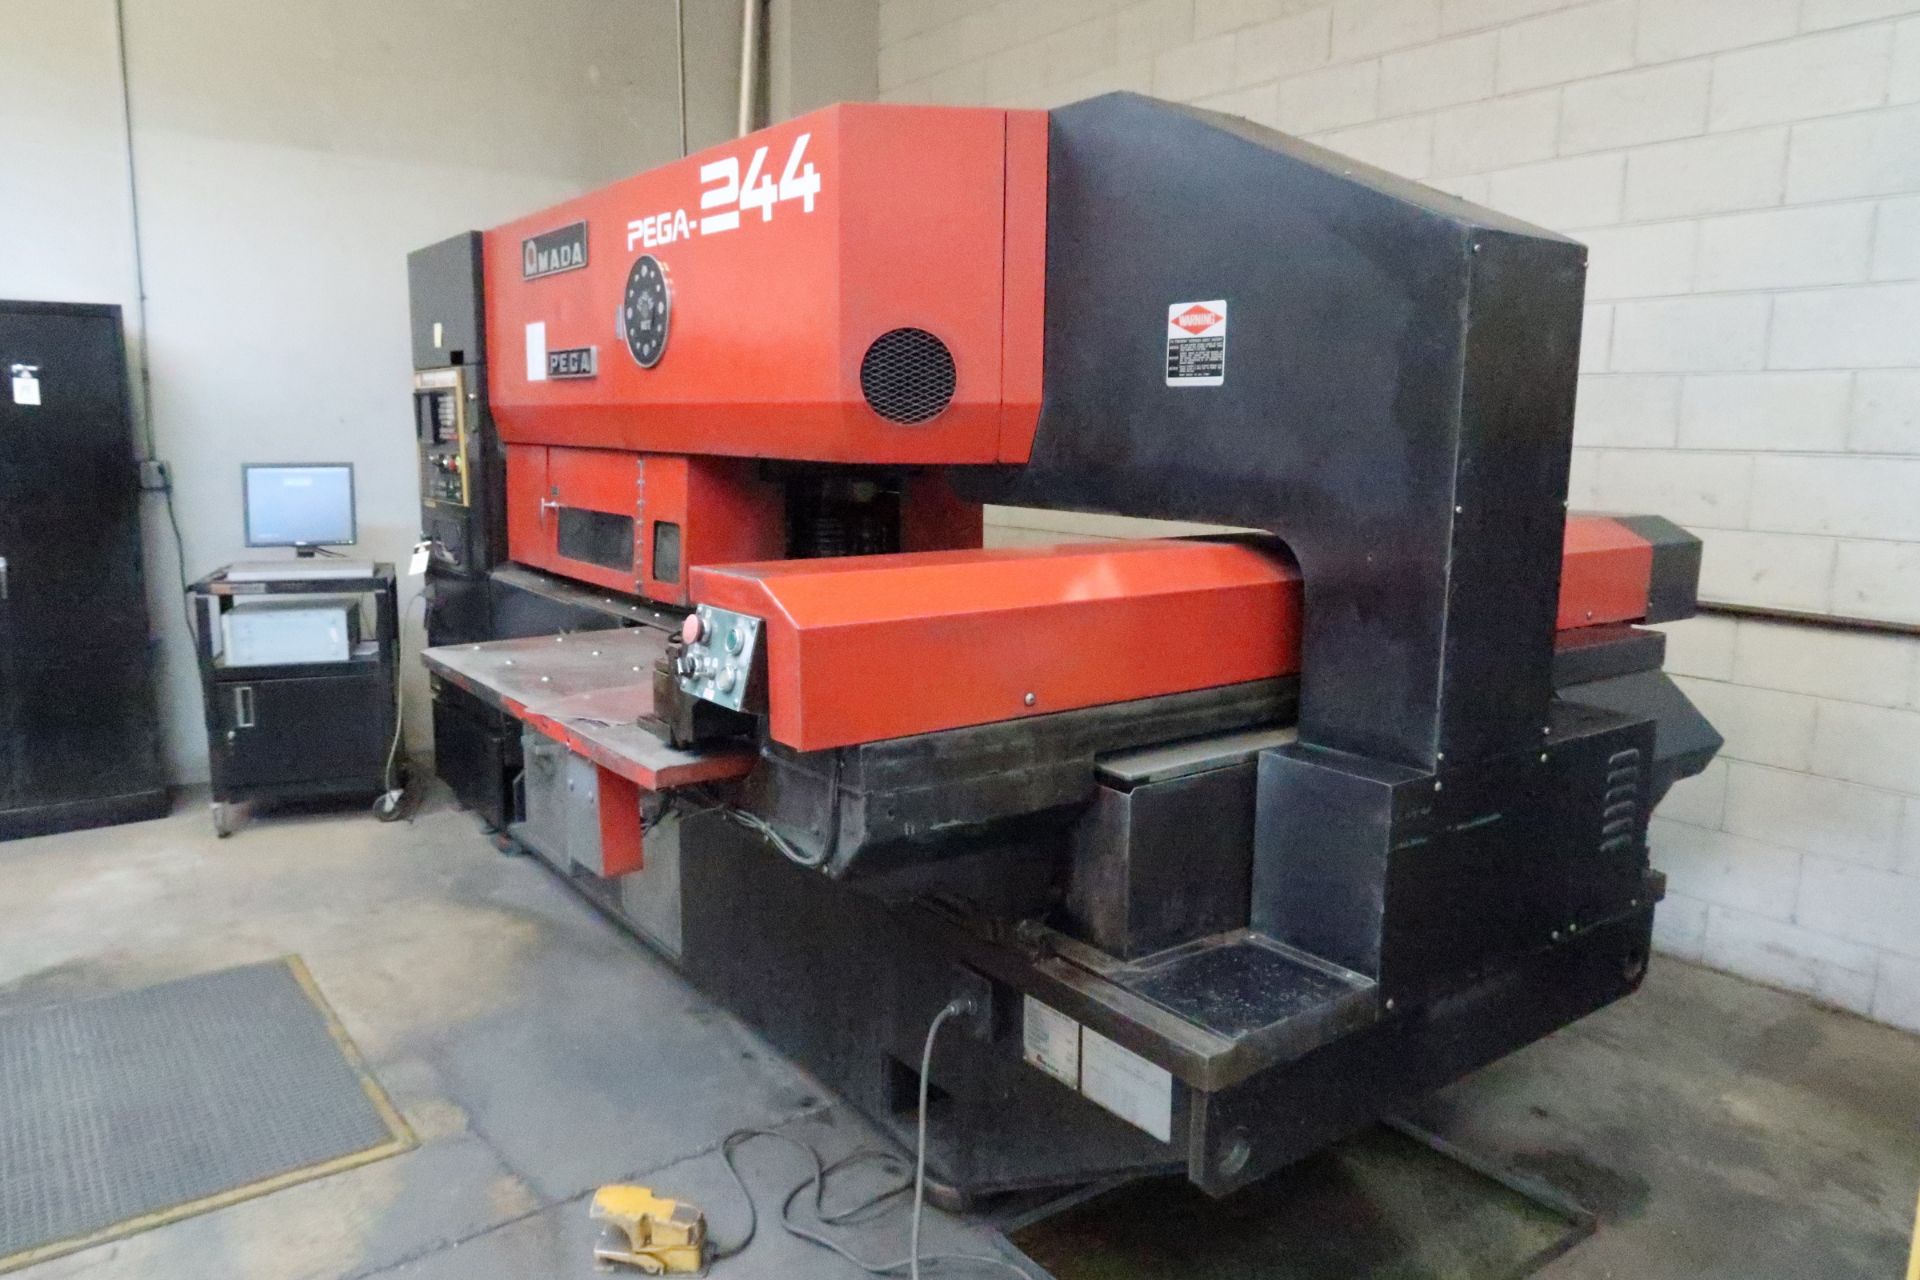 1986 Amada PEGA 244 CNC Punch, Thick turret, 20 stations (2) auto index. This Item is Sold AS IS. - Image 3 of 13